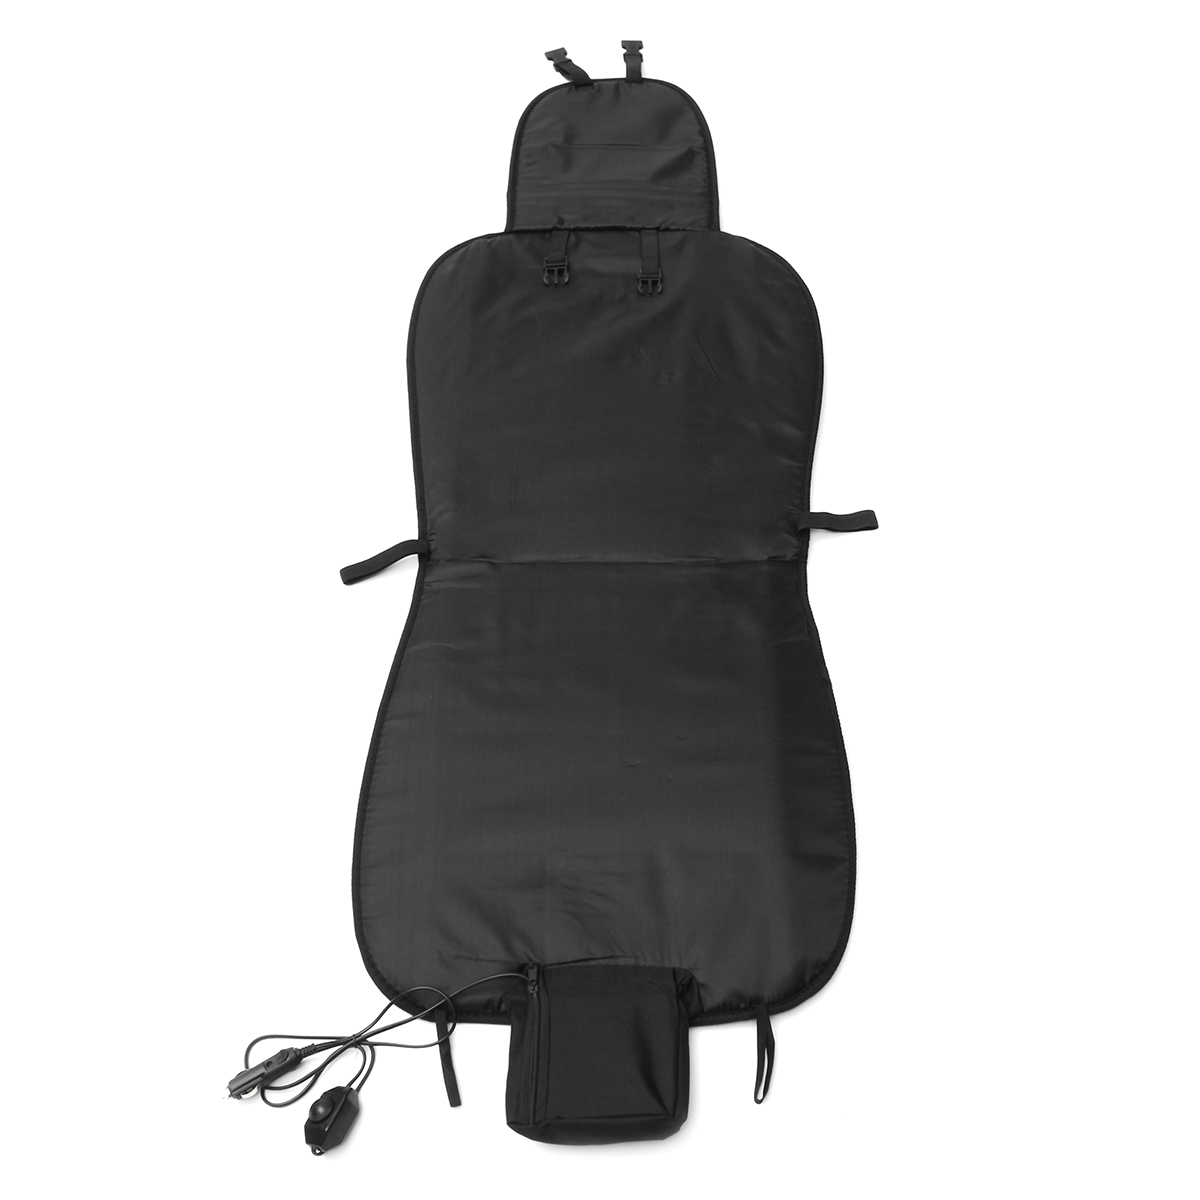 12V-Car-Cooling-Seat-Cushion-Covers-Speed-Control-Ventilate-Breathable-Summer-Chair-Fan-1331752